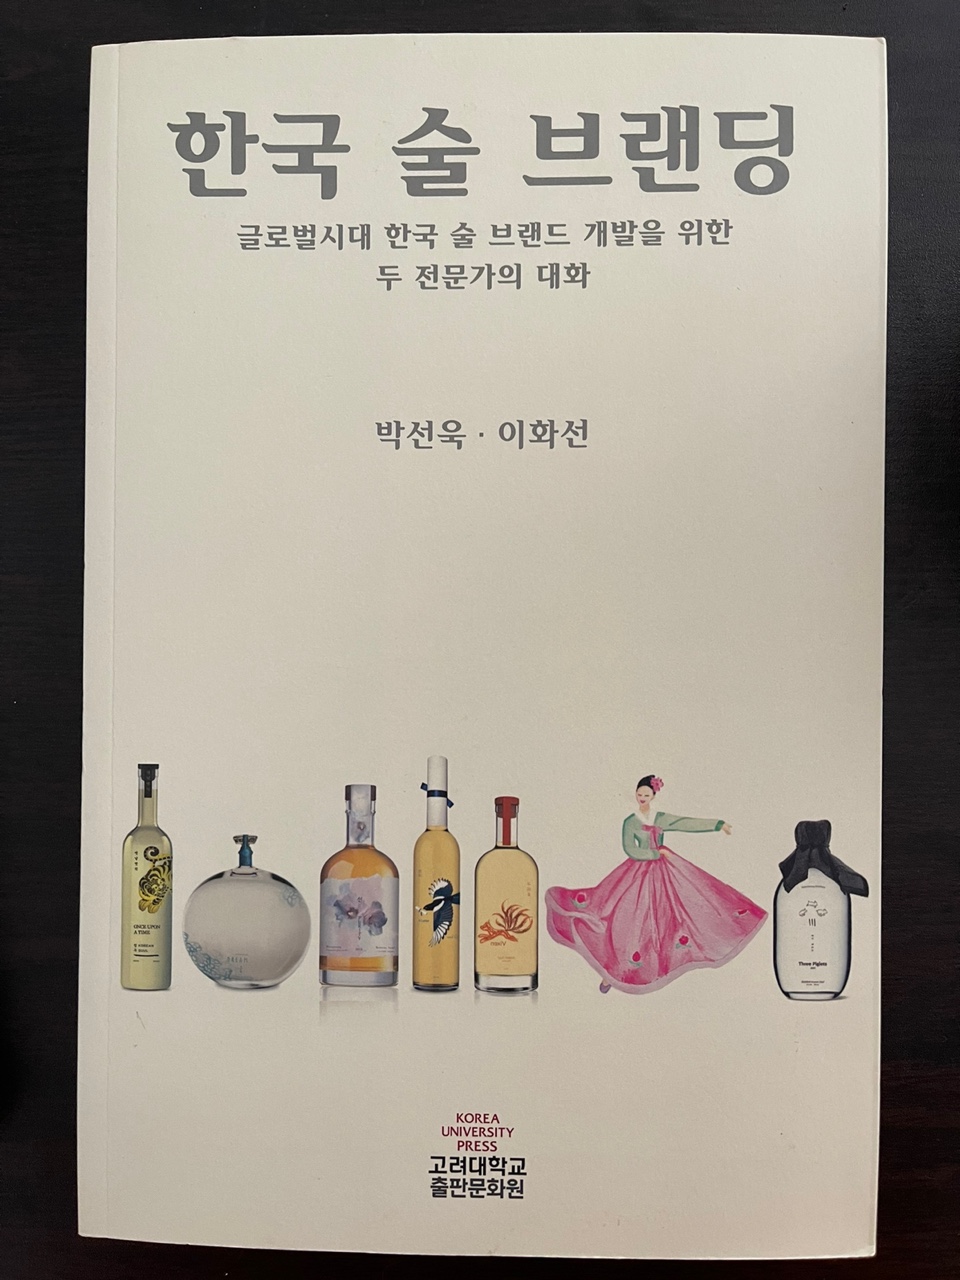 Q. We heard you wrote a book on liquor as well. - The book is called Branding Korean Liquor, and I co-wrote it with Mrs. Lee Hwa-seon. We completed the book in two months with extreme focus. It was published by the Korea University Press. The book contains stories on how we should brand Korean liquor and profiling examples of liquor concepts, such as its packages and tastes, resembling the arrangements of concept cars.